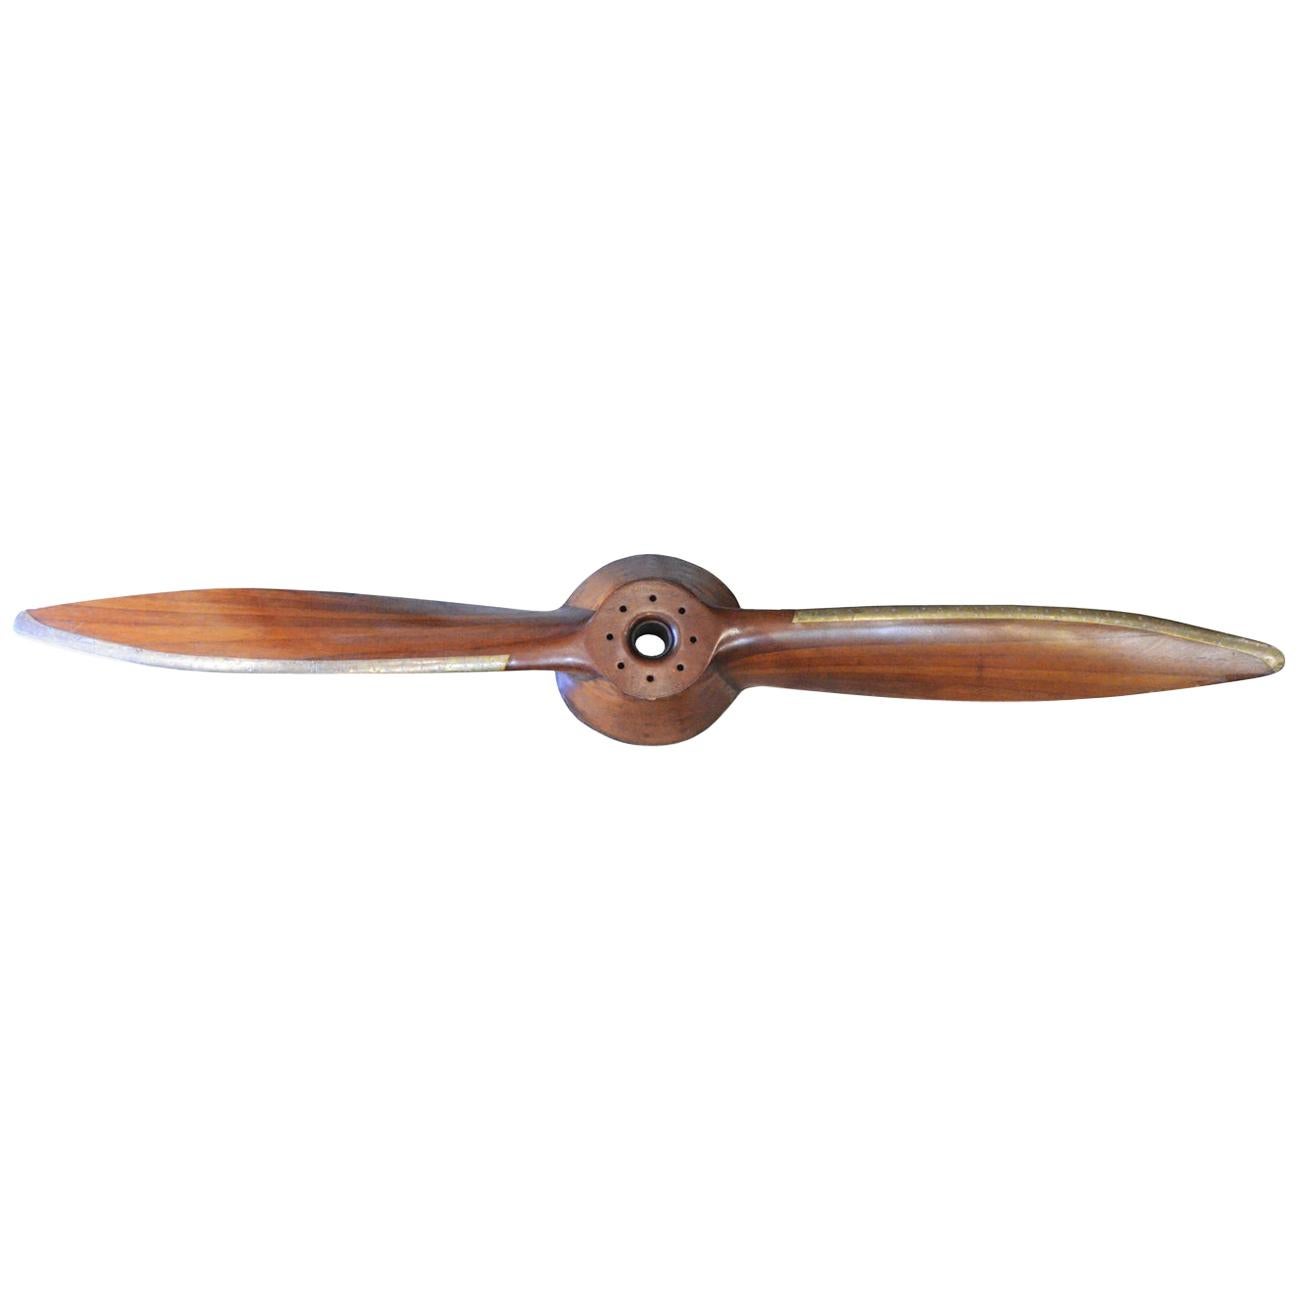 Propeller of lamellar mahogany with eight-hole hub produced by Hamilton Aereo Display Milwaukee in October 1929, brass reinforcement on the sides and tips.
The following inscriptions can be read on the wood:
D 3150 P 2960 OCT29 R R FXI 16124.
The